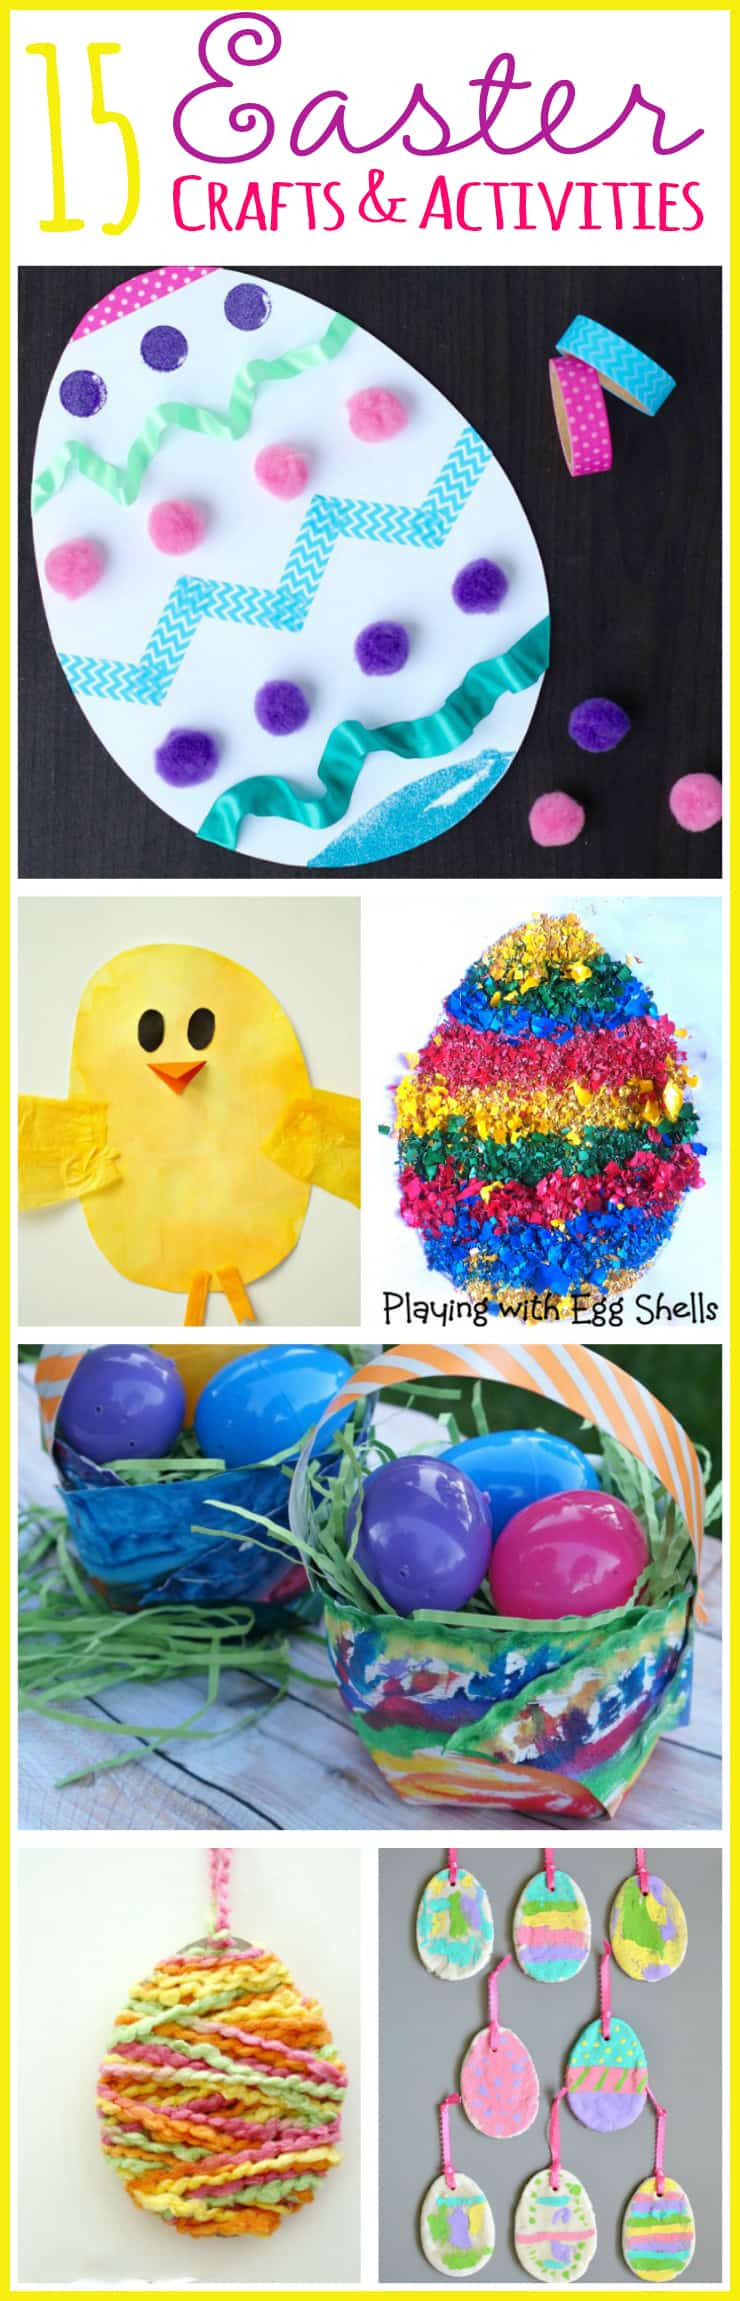 Easter Games And Activities
 15 Fun & Easy Easter Crafts and Activities for Kids 5